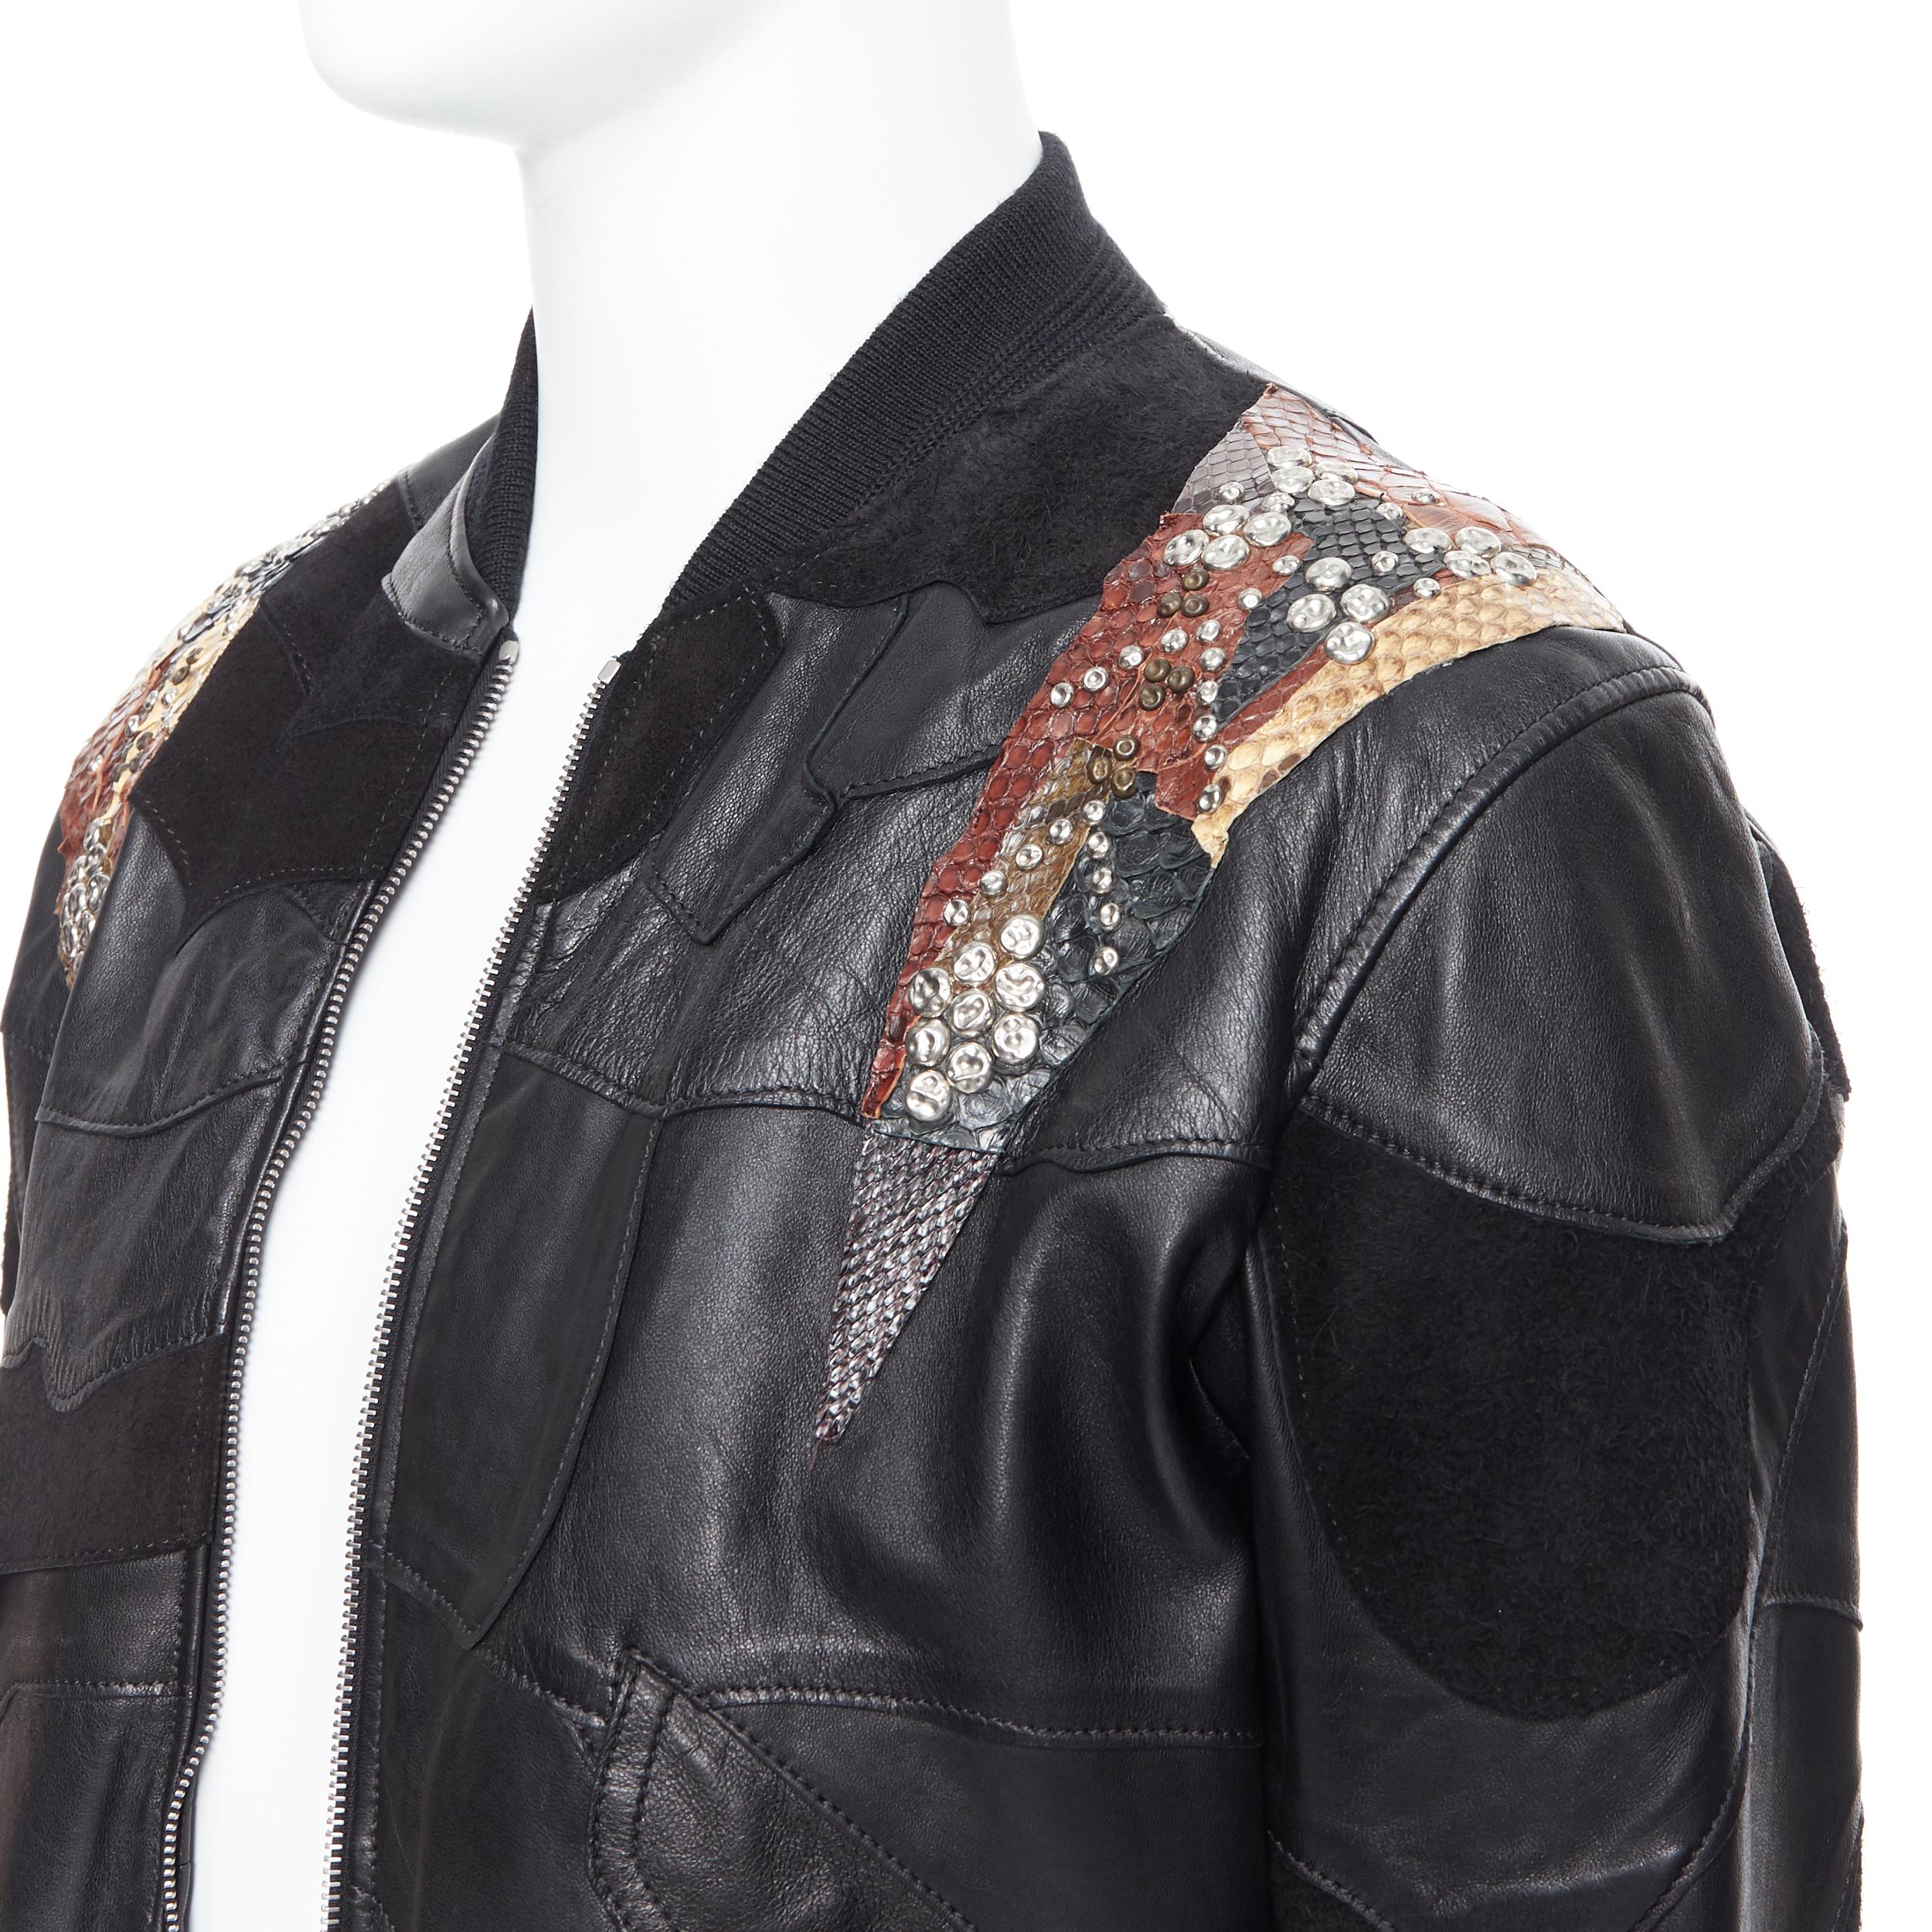 new SAINT LAURENT Runway SS18 black leather studded patchwork bomber jacket FR50
Brand: Saint Laurent
Designer: Anthony Vacarello
Collection: SS18
Model Name / Style: Leather bomber
Material: Leather
Color: Black
Pattern: Solid
Closure: Zip
Extra